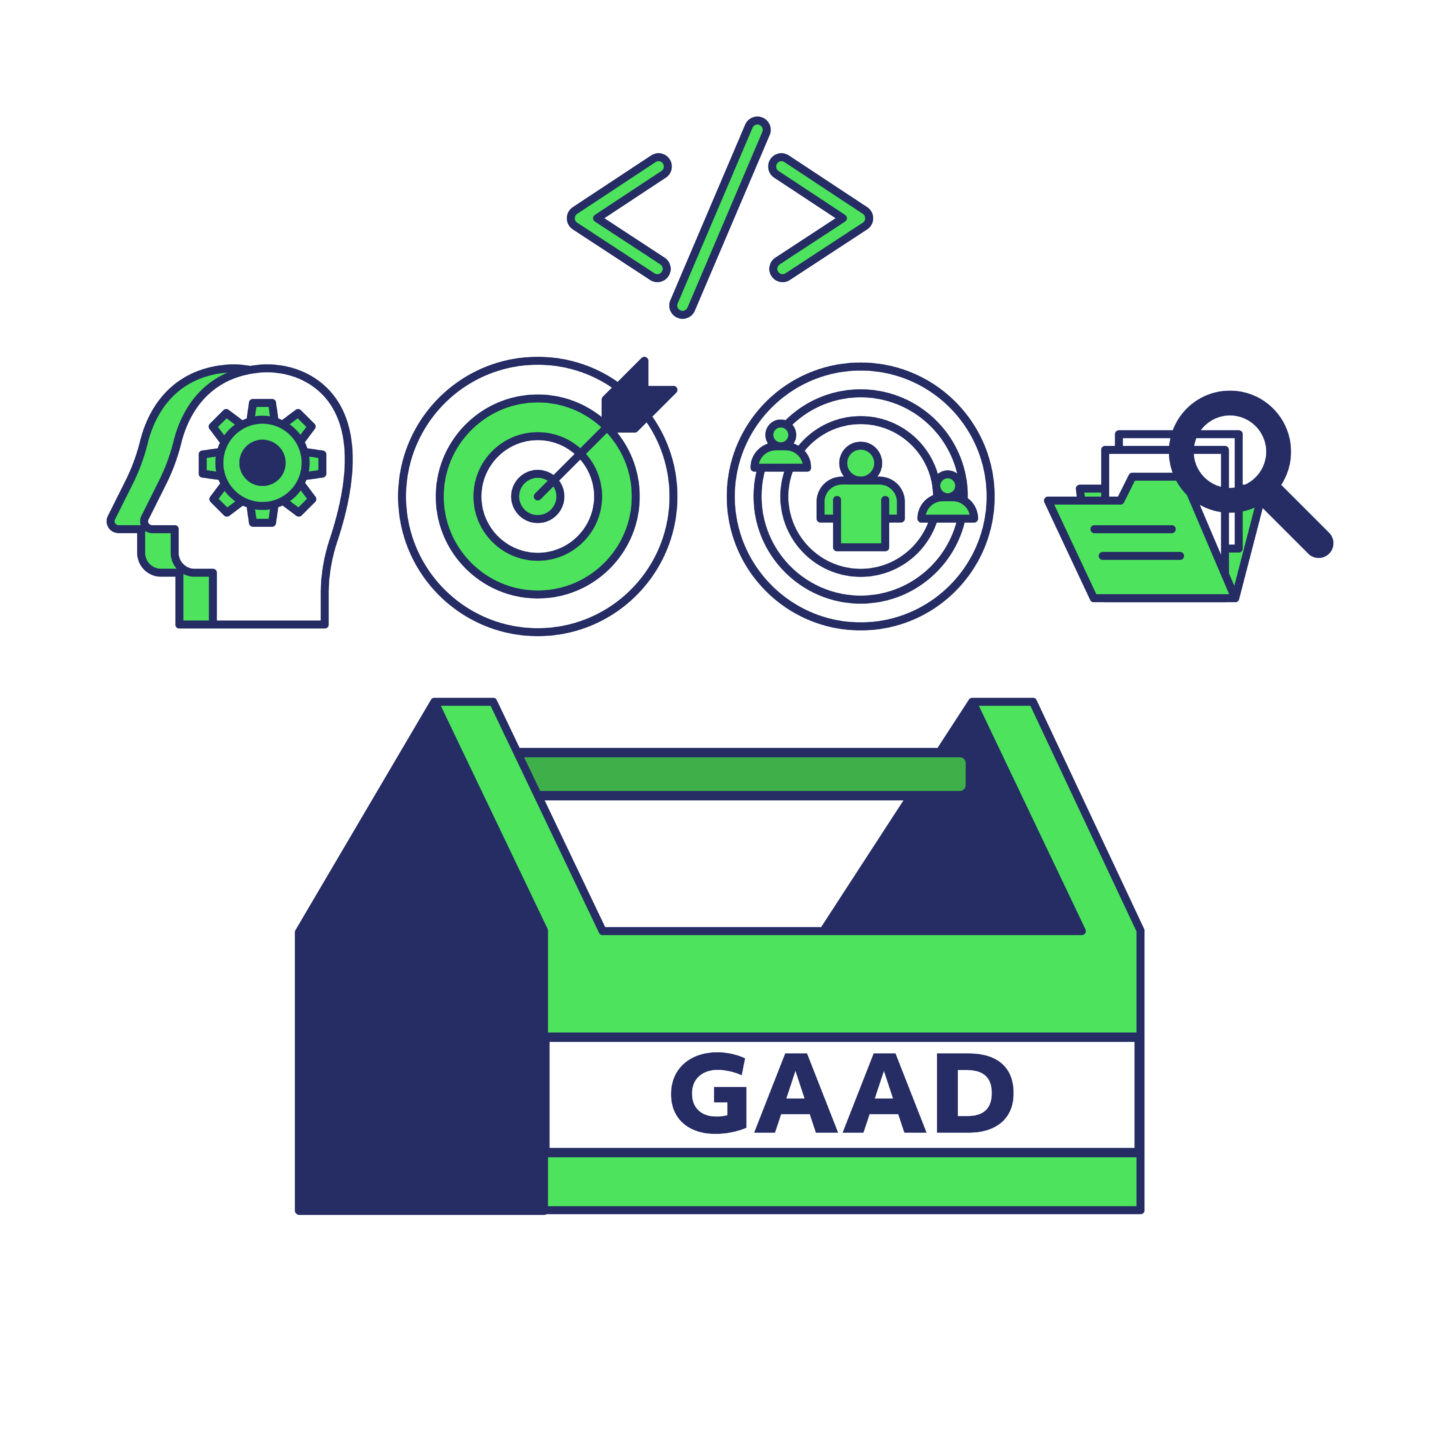 Icons of GAAD Toolbox with gear and head, target and arrow, team with concentric circles, and magnifying glass with resources and coding symbol.